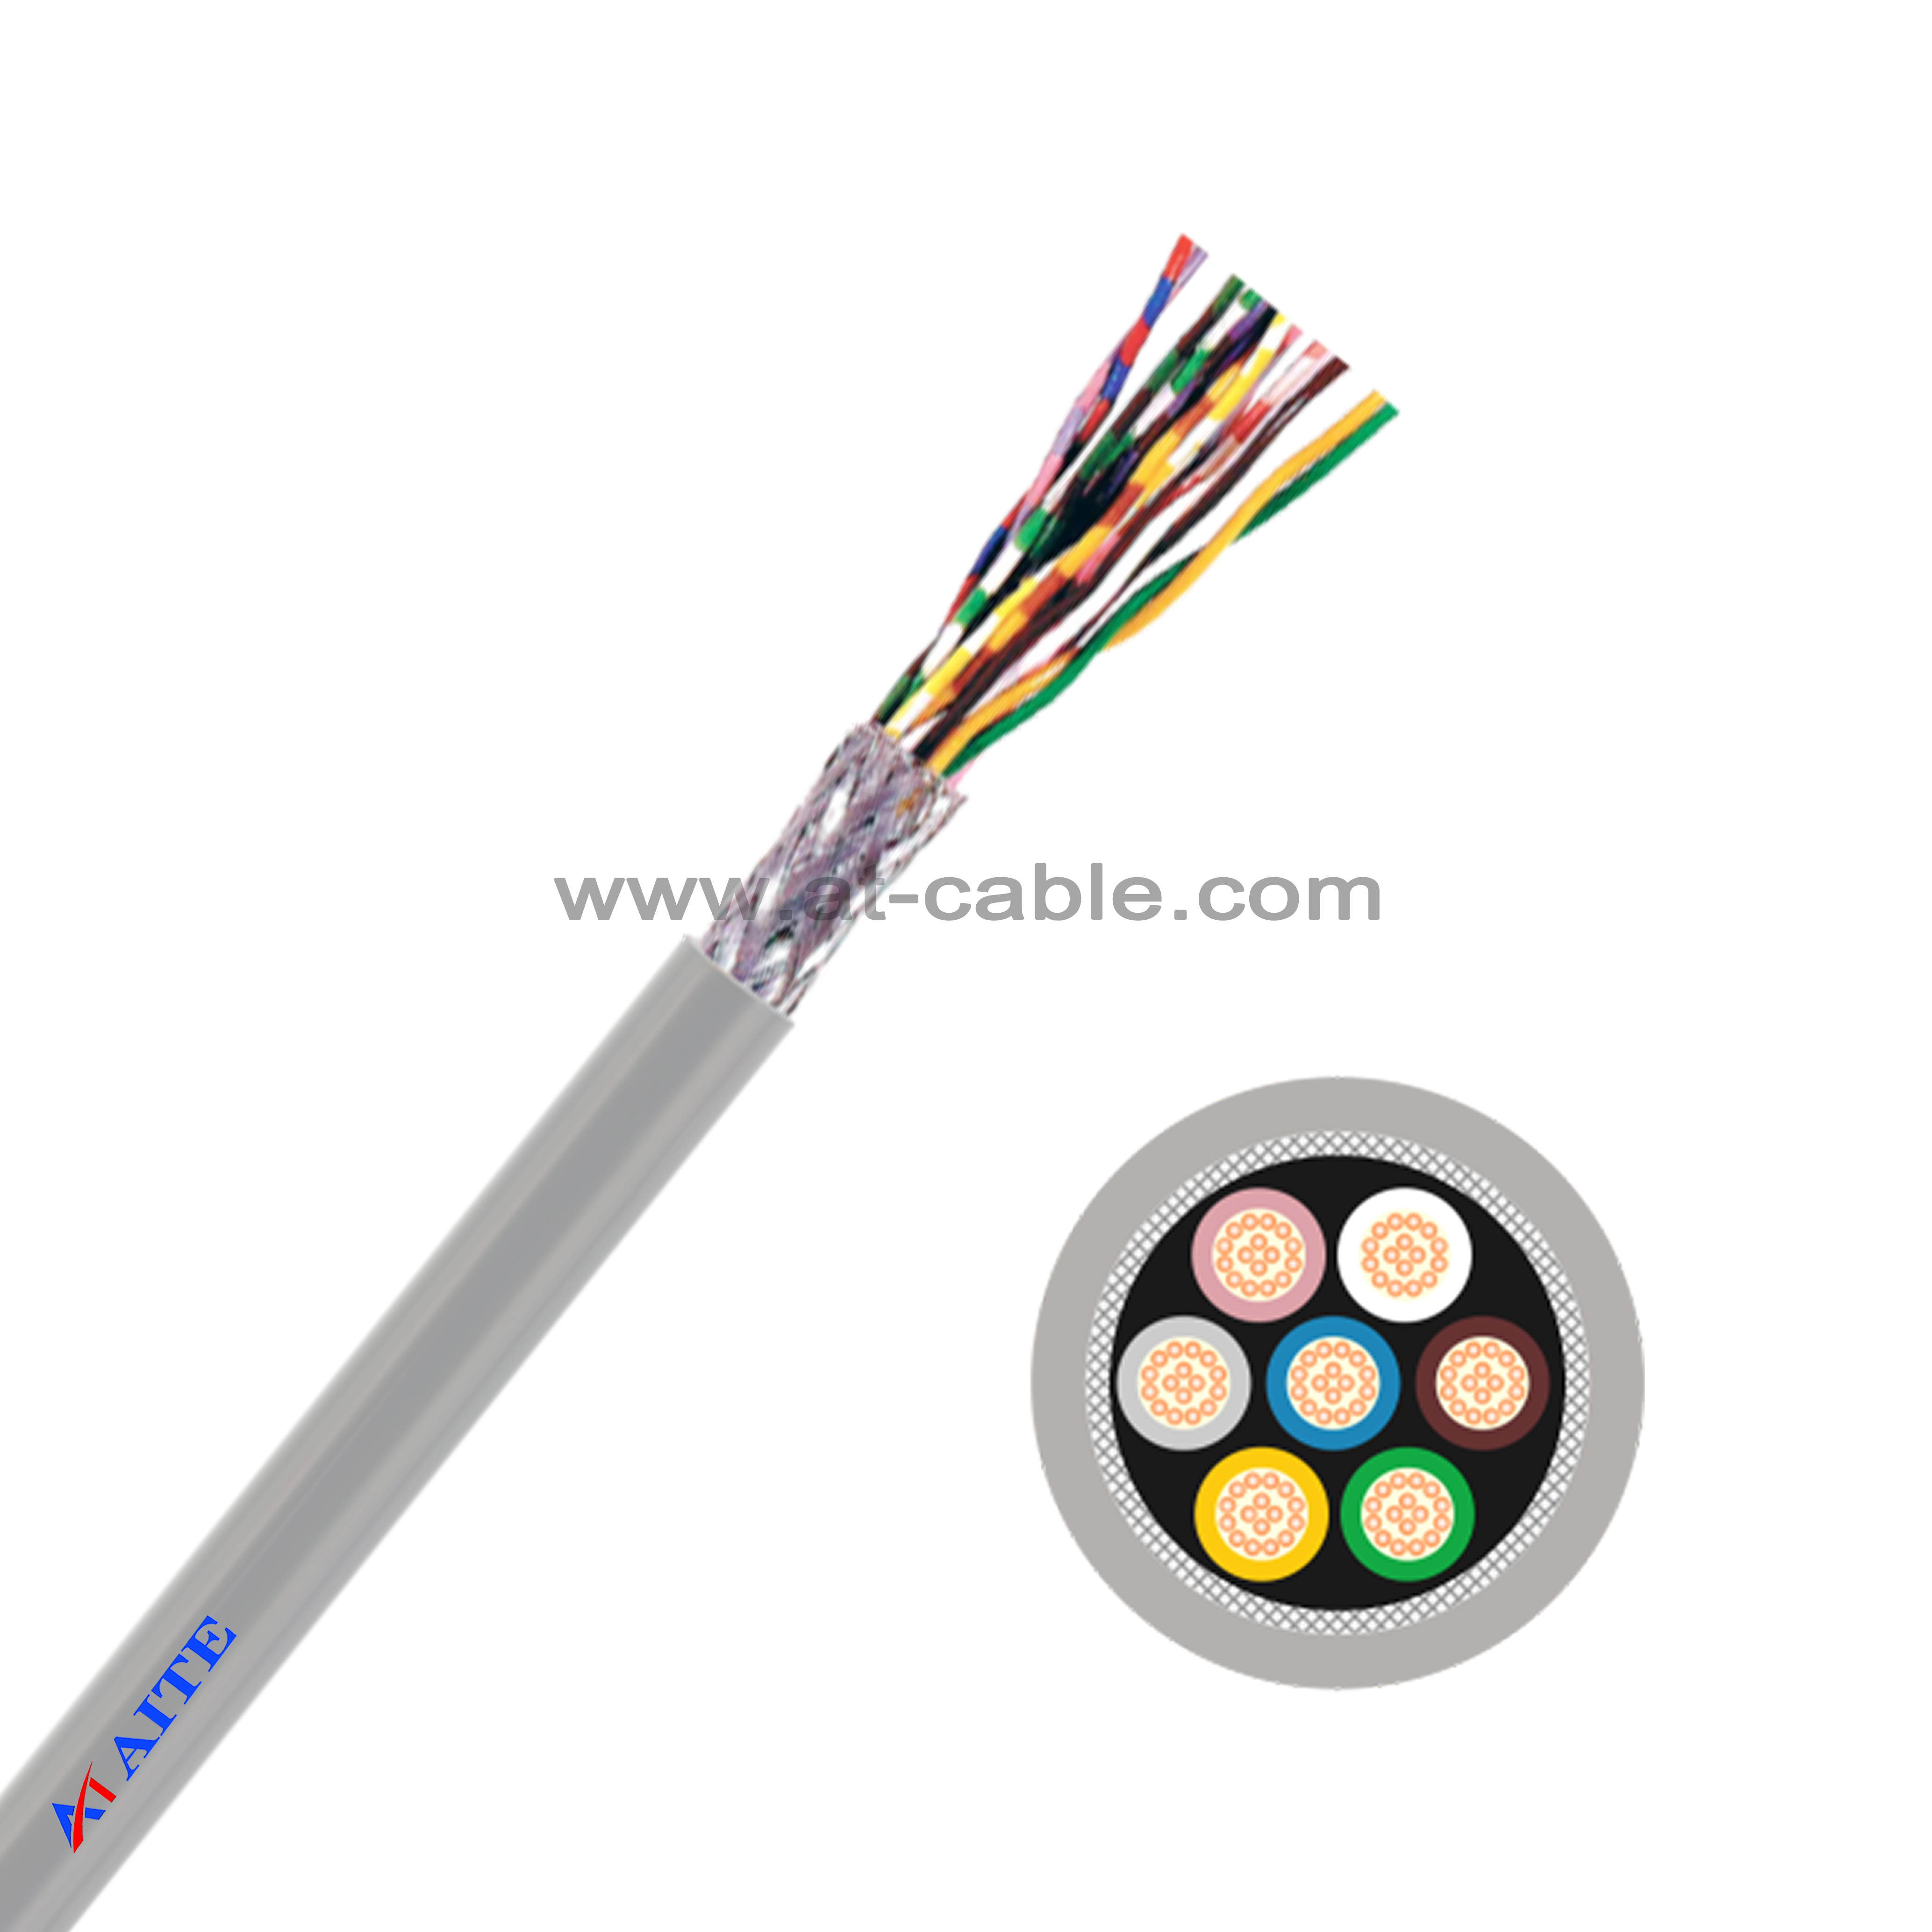 LiYCY Control Cable/ Data Cable